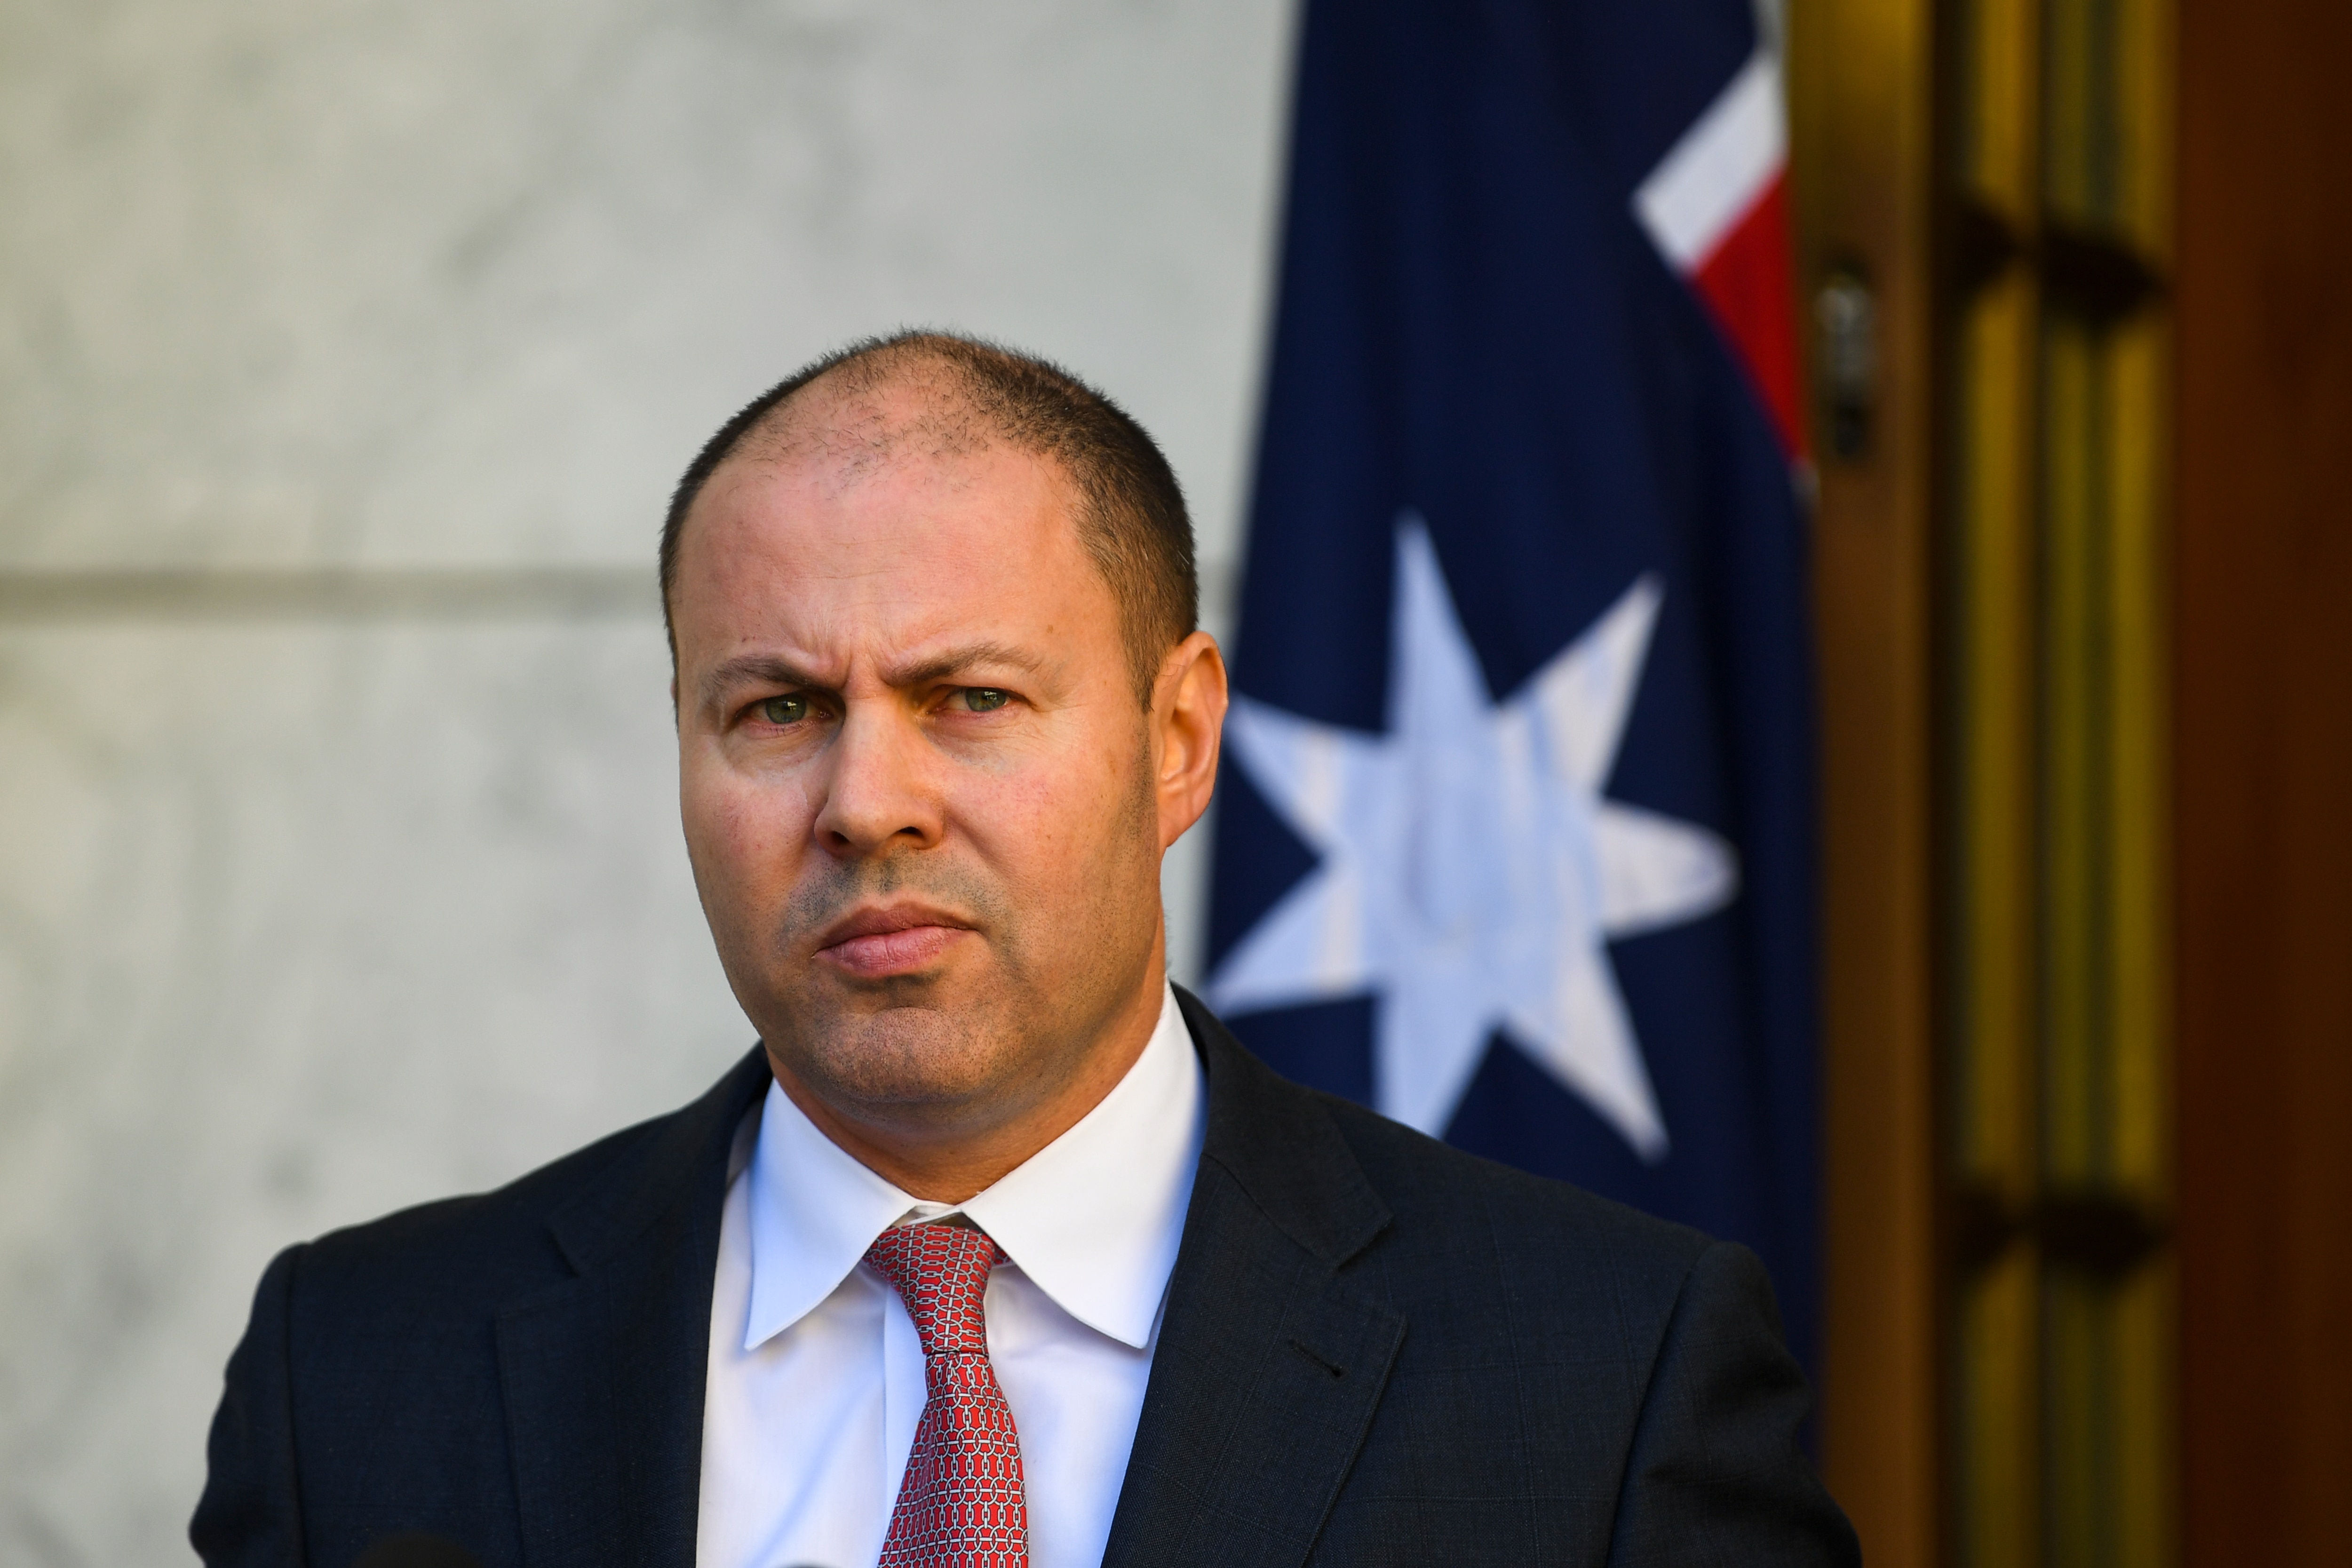 Australian Treasurer Josh Frydenberg speaks to the media during a press conference at Parliament House in Canberra, Thursday, March 19, 2020. (AAP Image/Lukas Coch) NO ARCHIVING